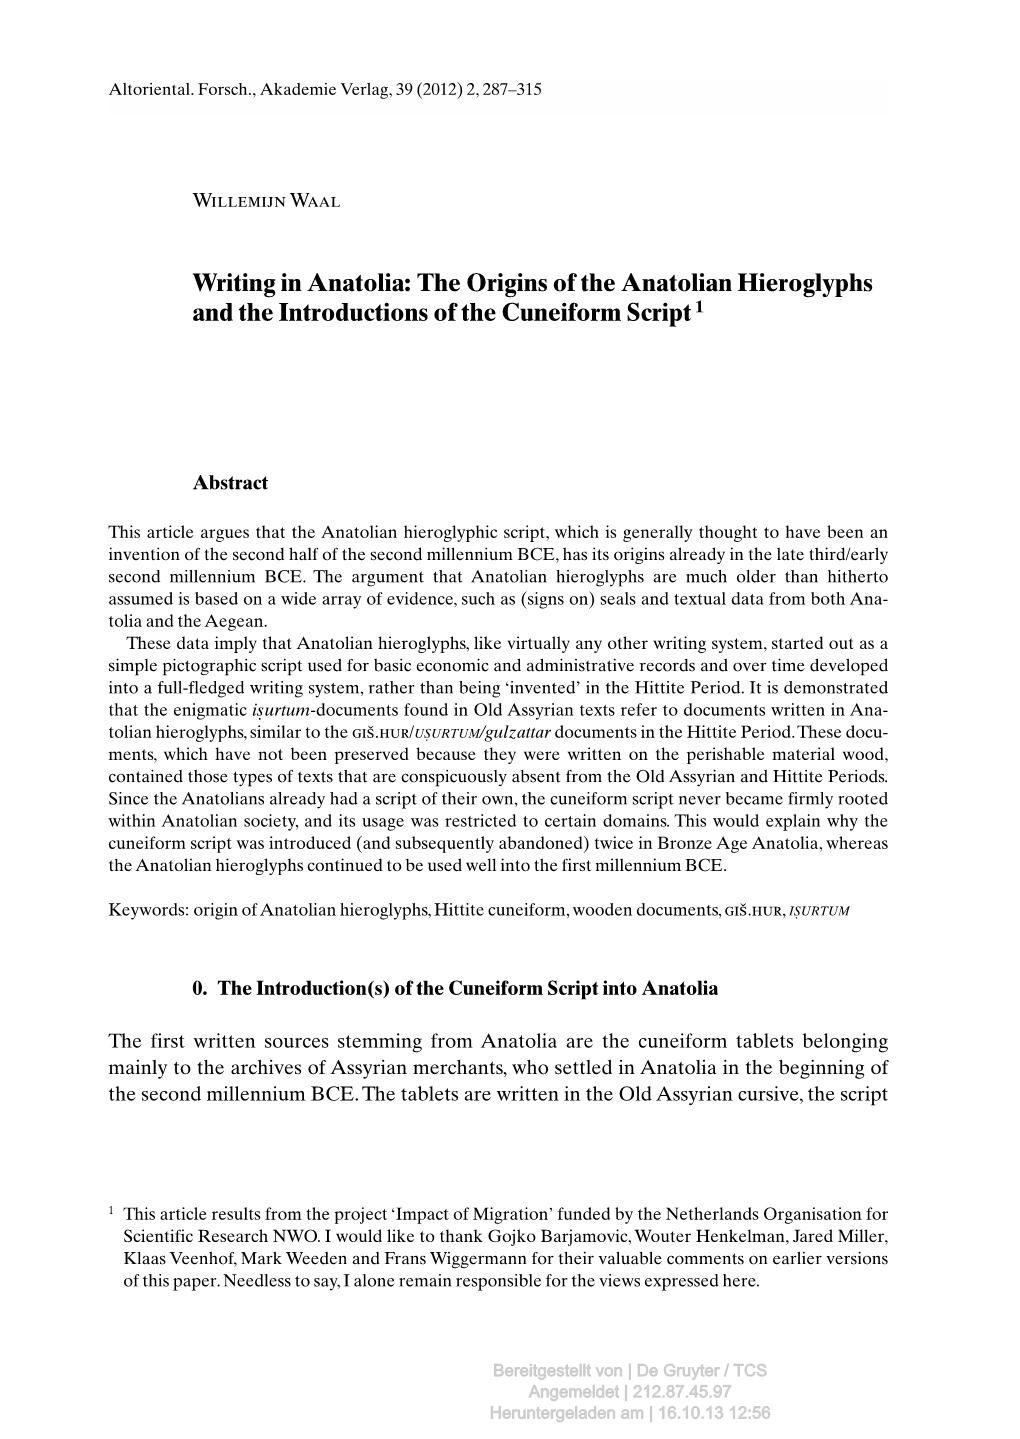 Writing in Anatolia: the Origins of the Anatolian Hieroglyphs and the Introductions of the Cuneiform Script 1